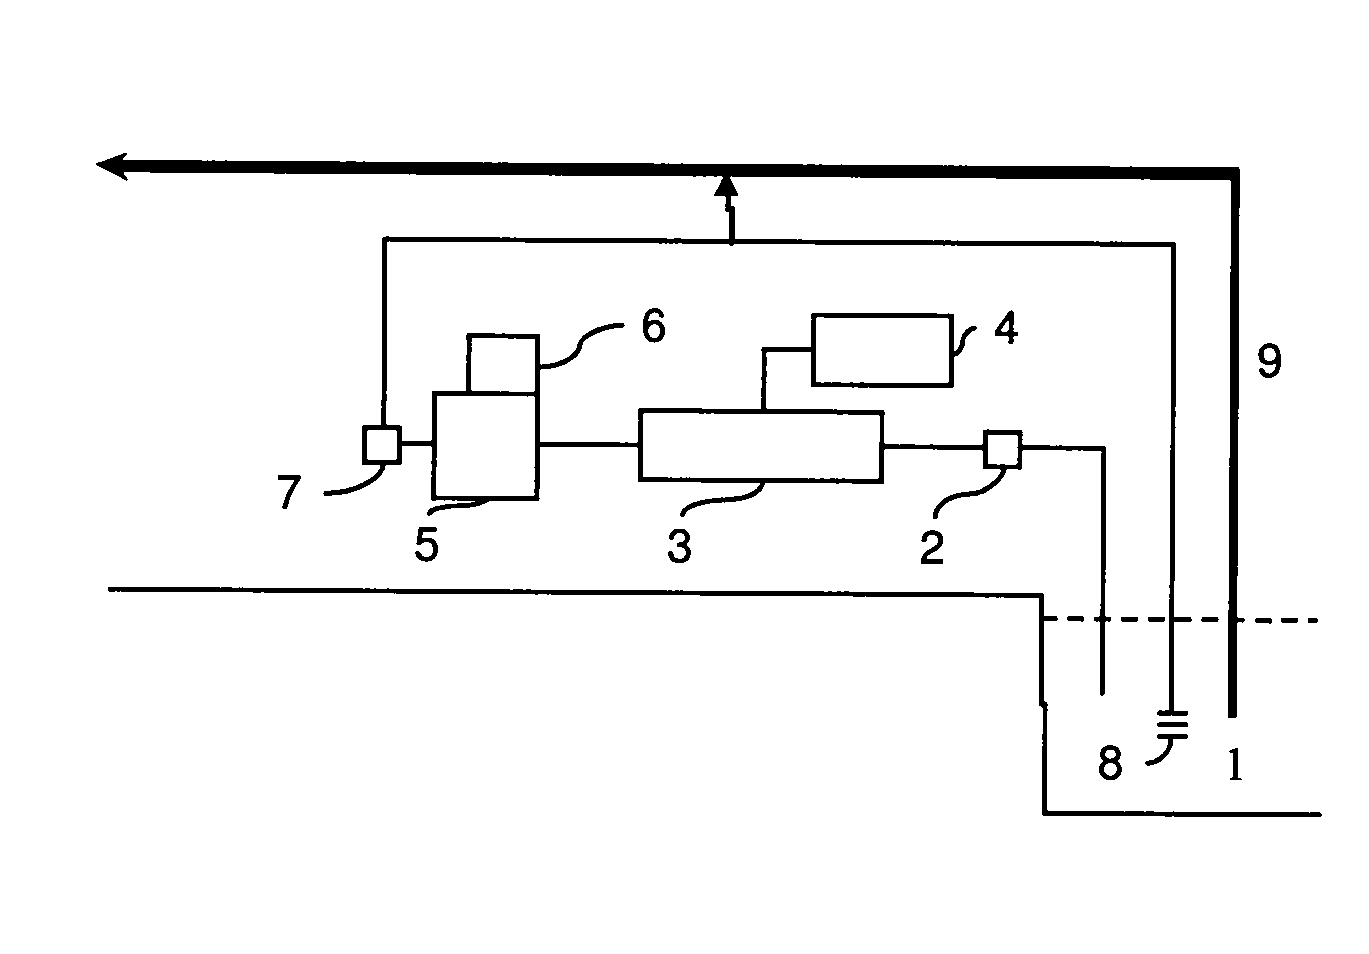 Method and System for Biofouling Control of Shipboard Components